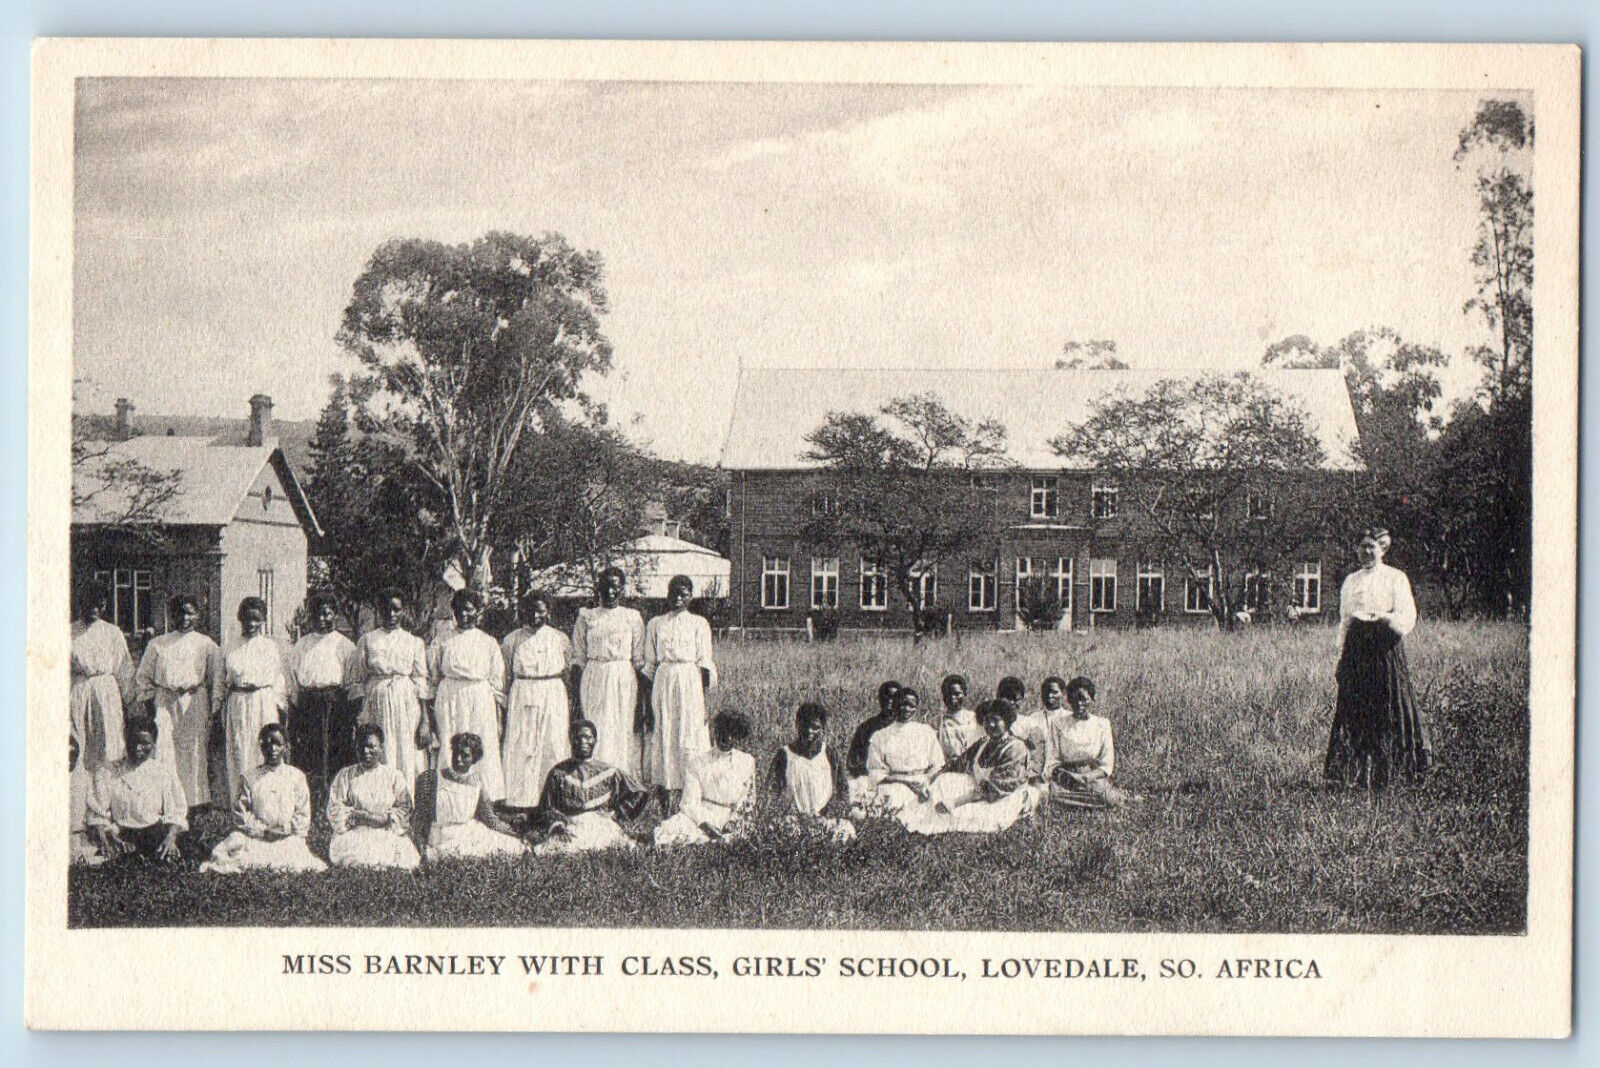 Lovedale S. Africa Postcard Miss Barnley with Class Girls School c1940\'s Vintage